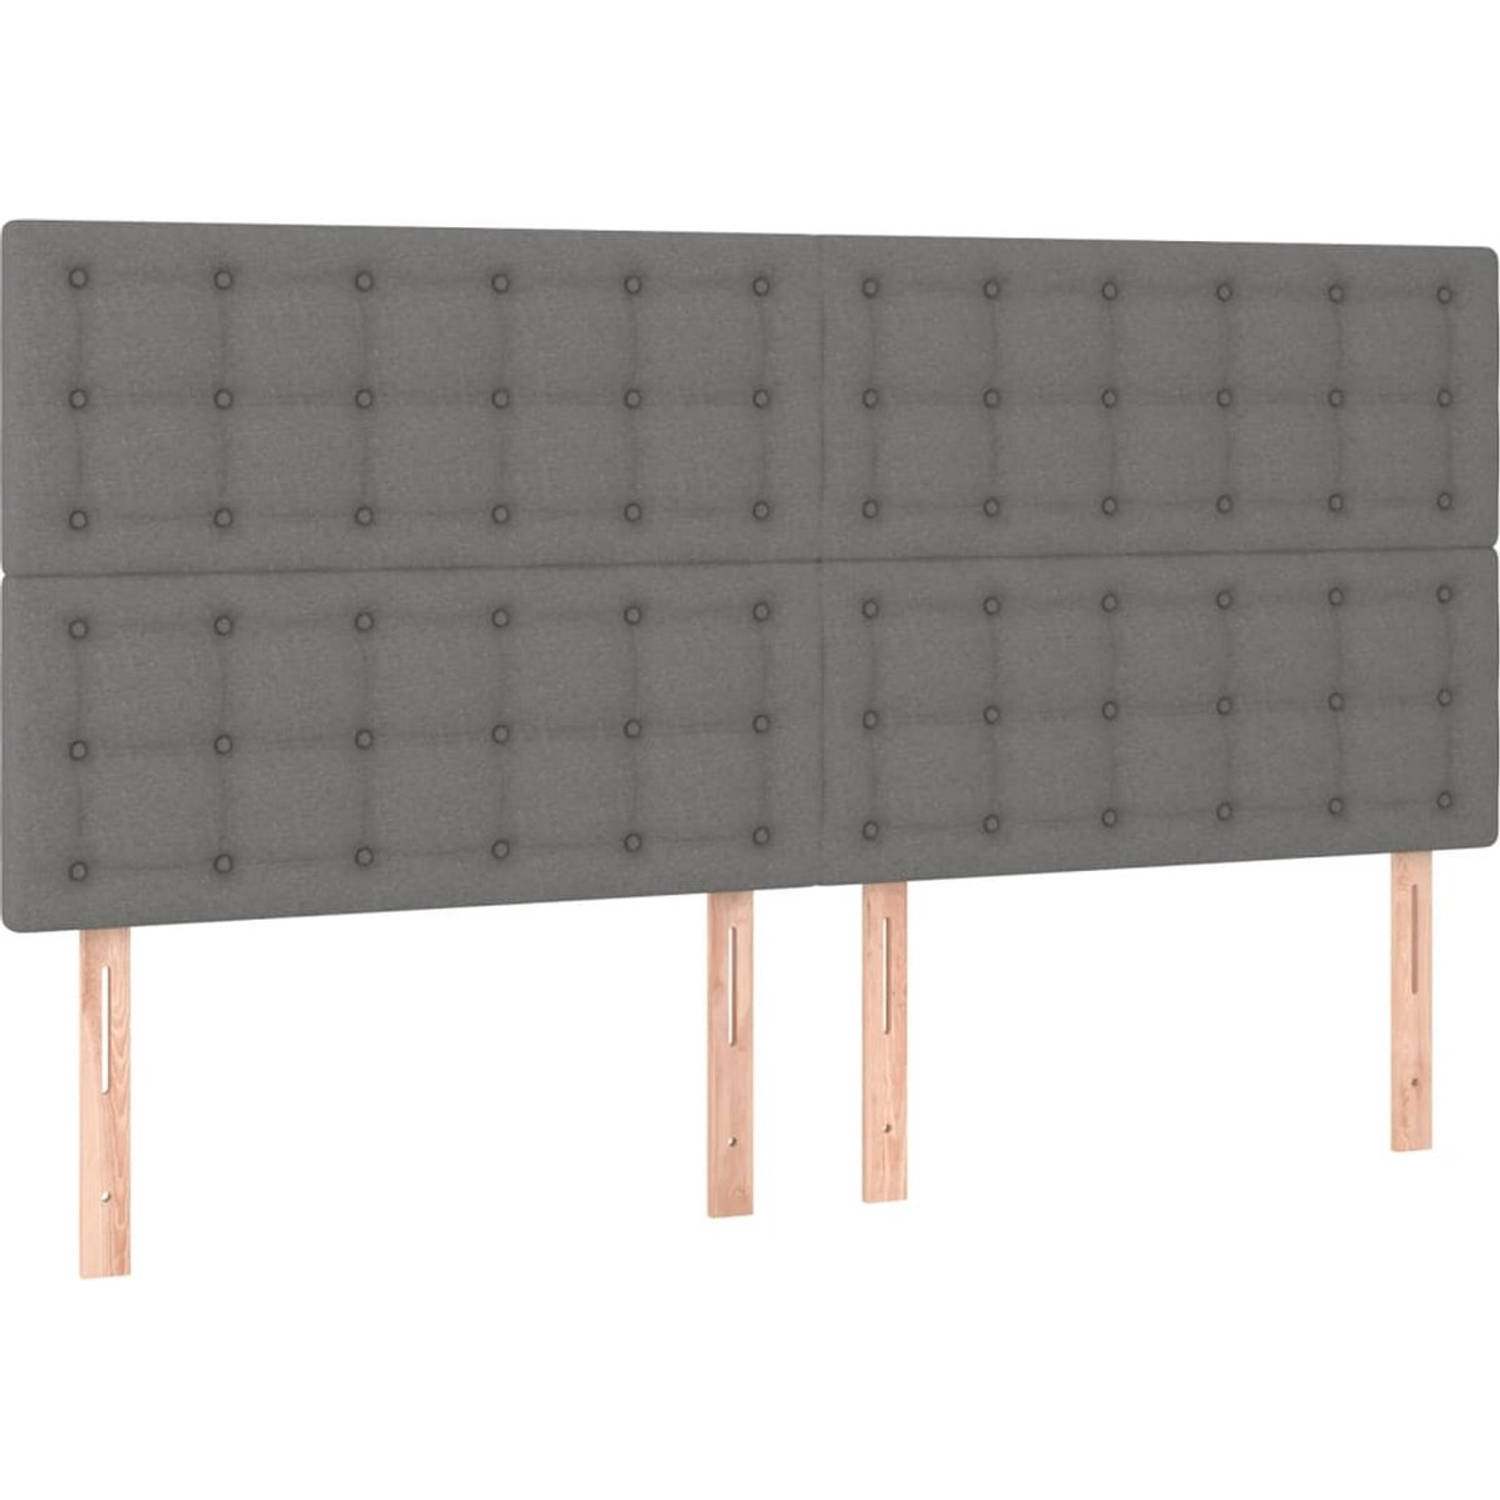 The Living Store Boxspringbed - Comfort - Bed 203x203cm - Duurzaam materiaal